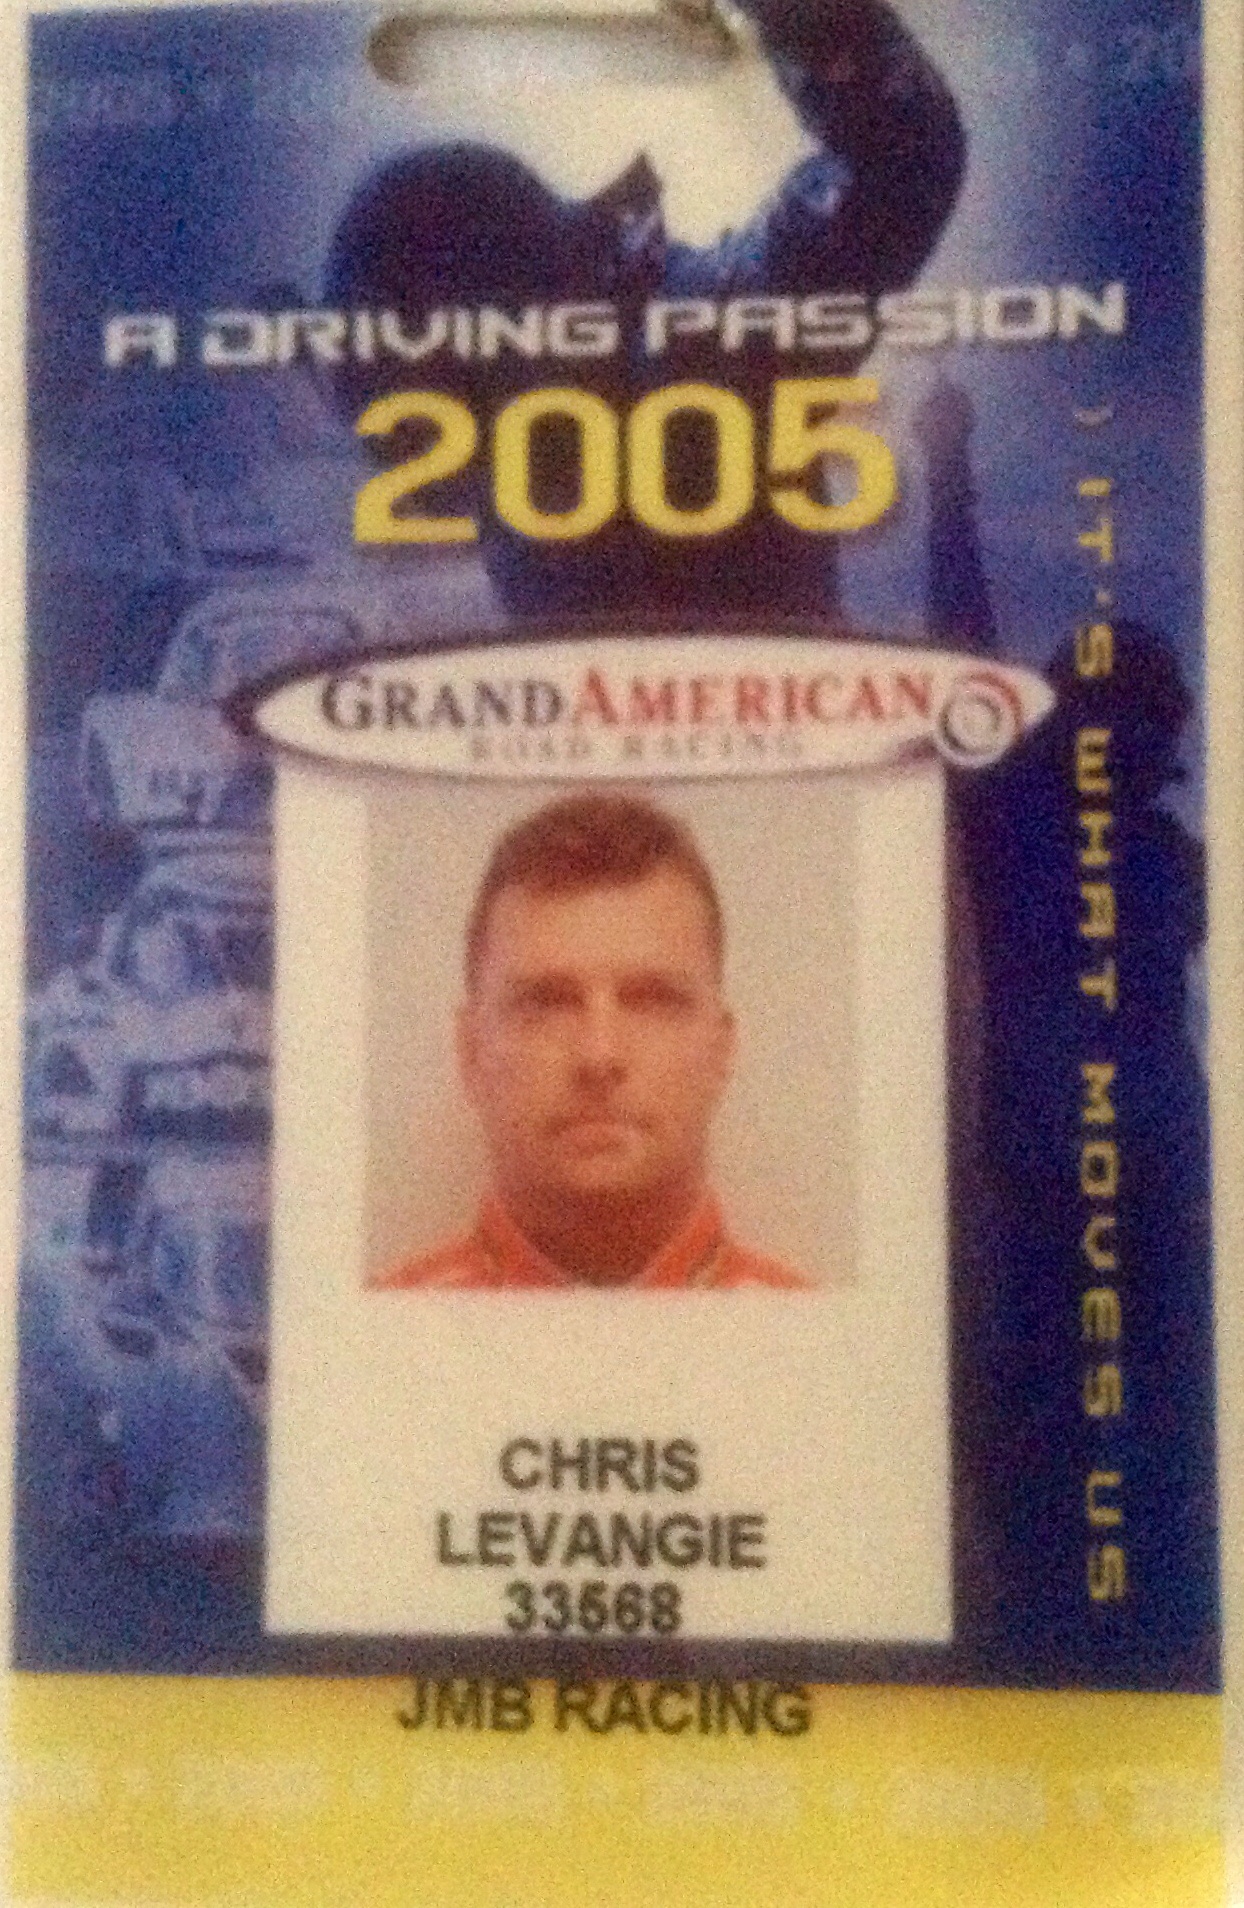 Professional Driver for JMB ferrari Racing north America. I also did speedvision ( later SPEED ) Channel commentary and interviews. Driving instructor for the red Driving Experience .